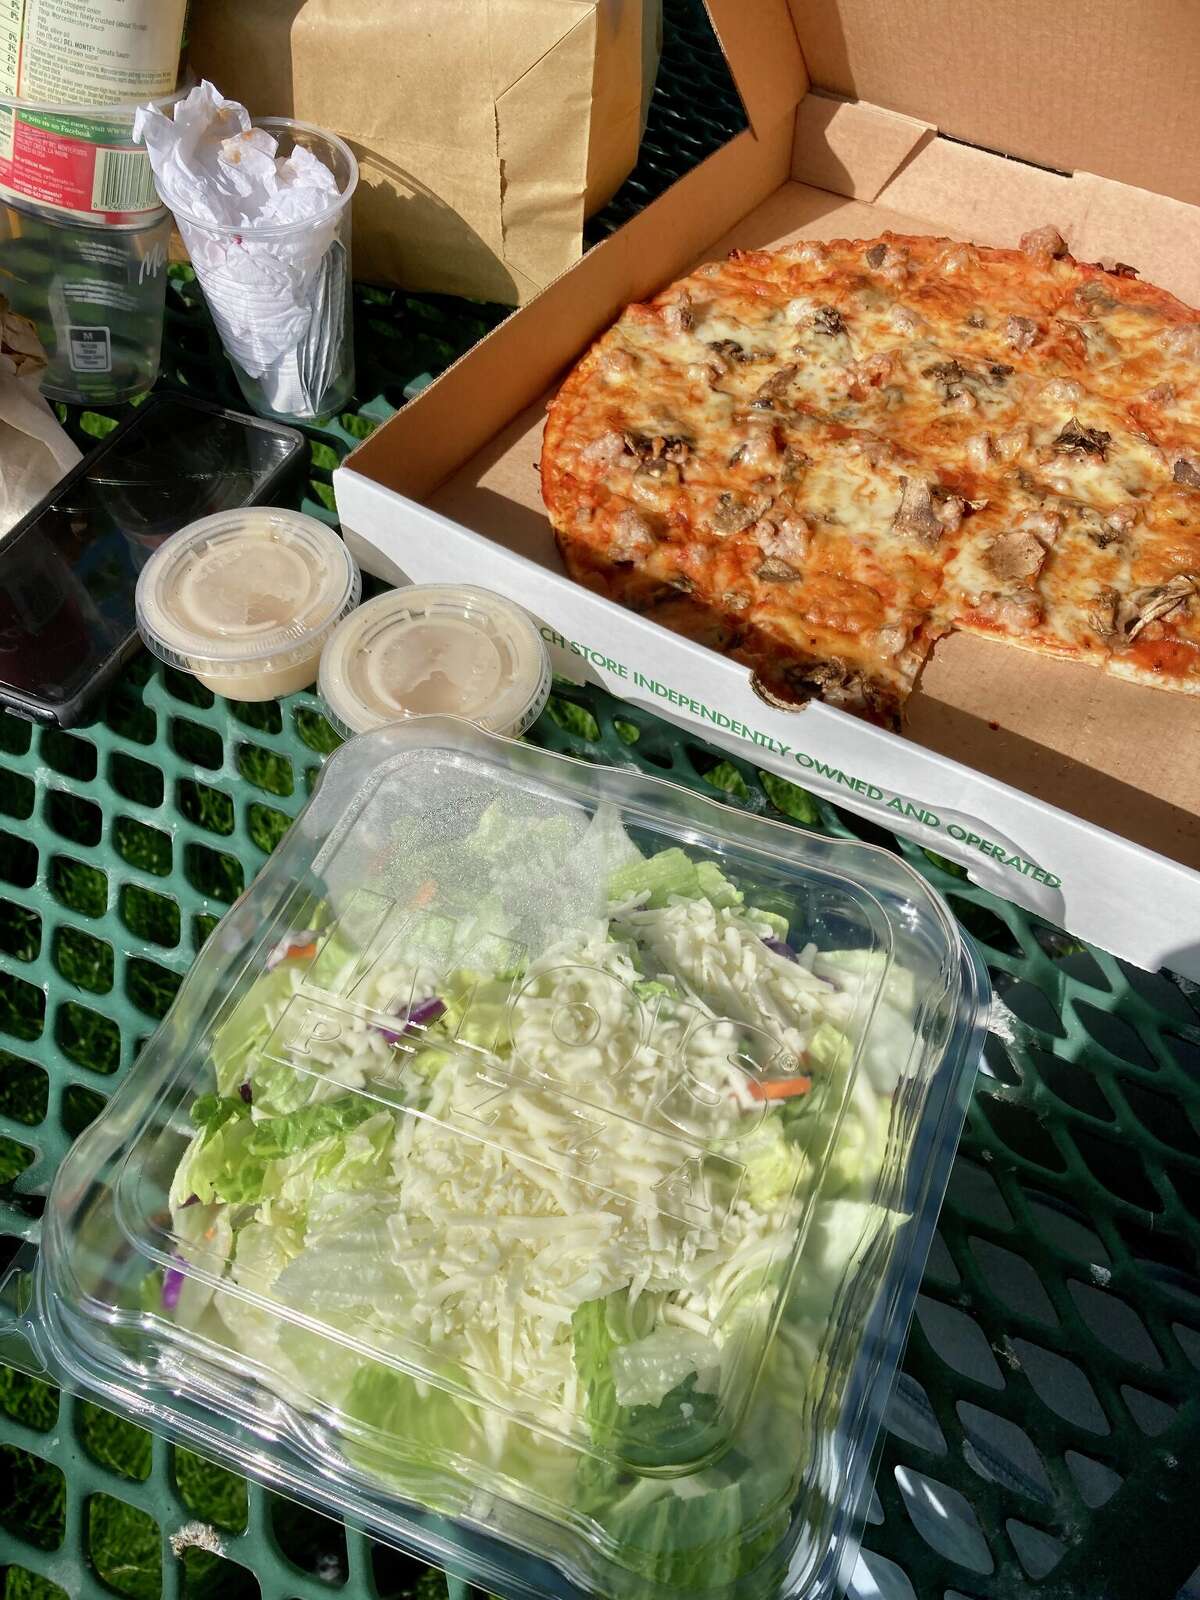 The famous Imo's pizza, with Italian sausage and mushrooms, that's thin crust and always with Provel cheese and the restaurant's famous salad with Imo's house Italian dressing. The Mother's Day Special also included toasted ravioli and garlic bread.